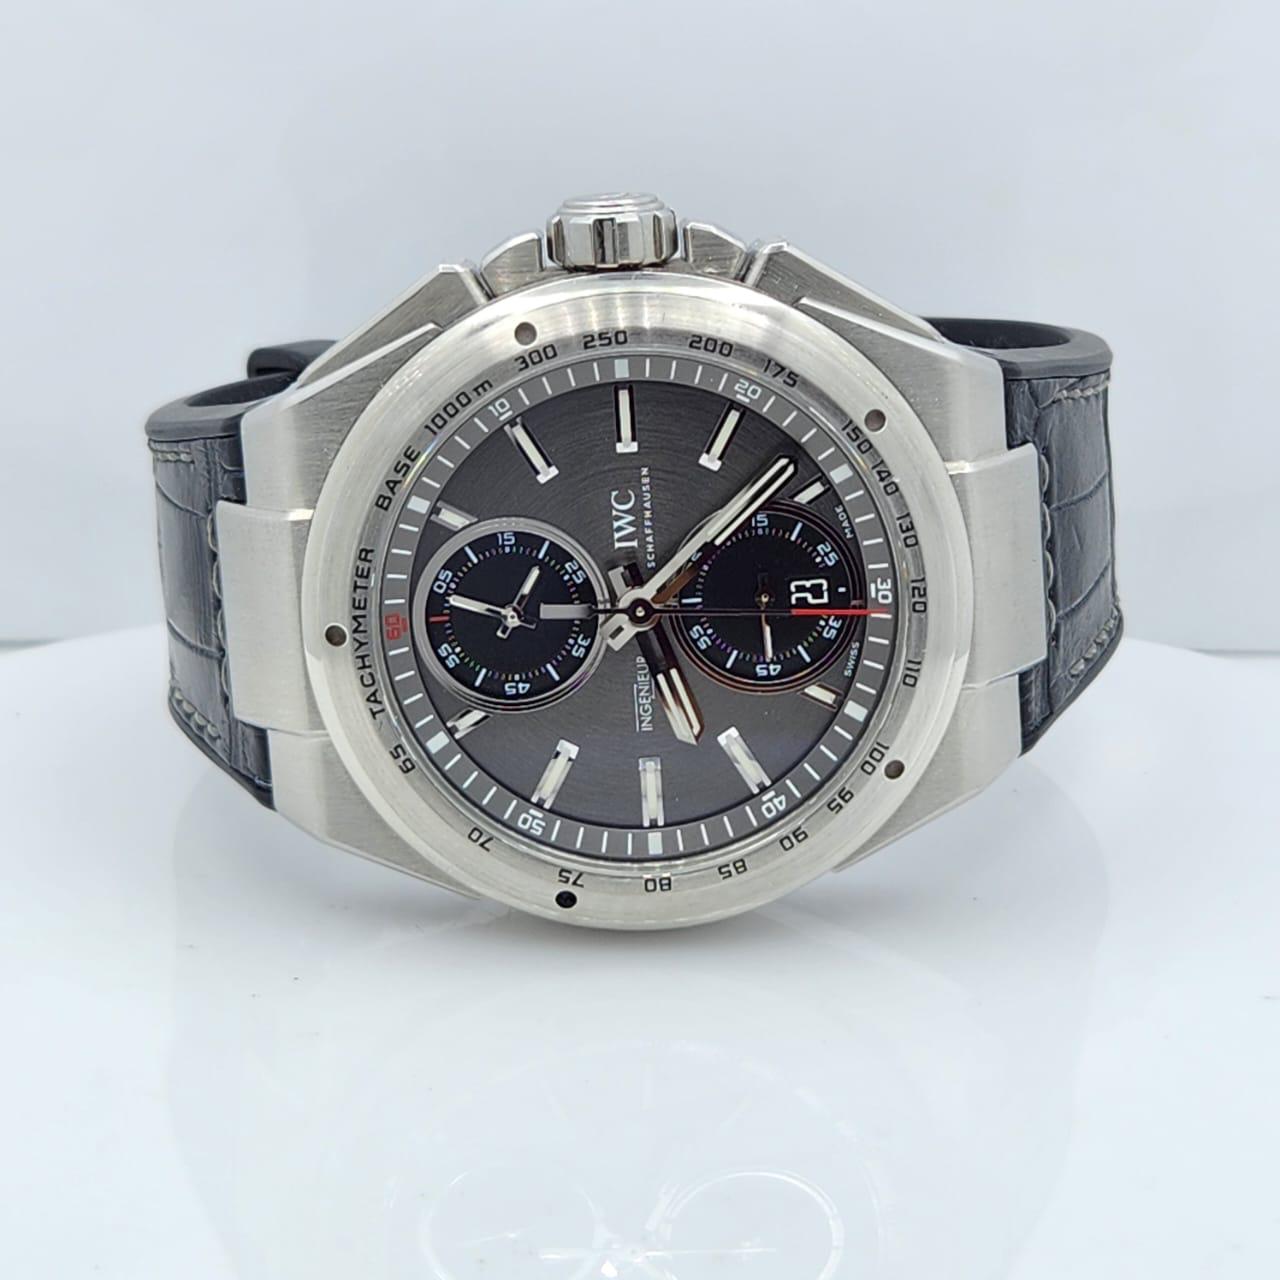 IWC Ingenieur Chronograph Racer 45mm Automático Completo